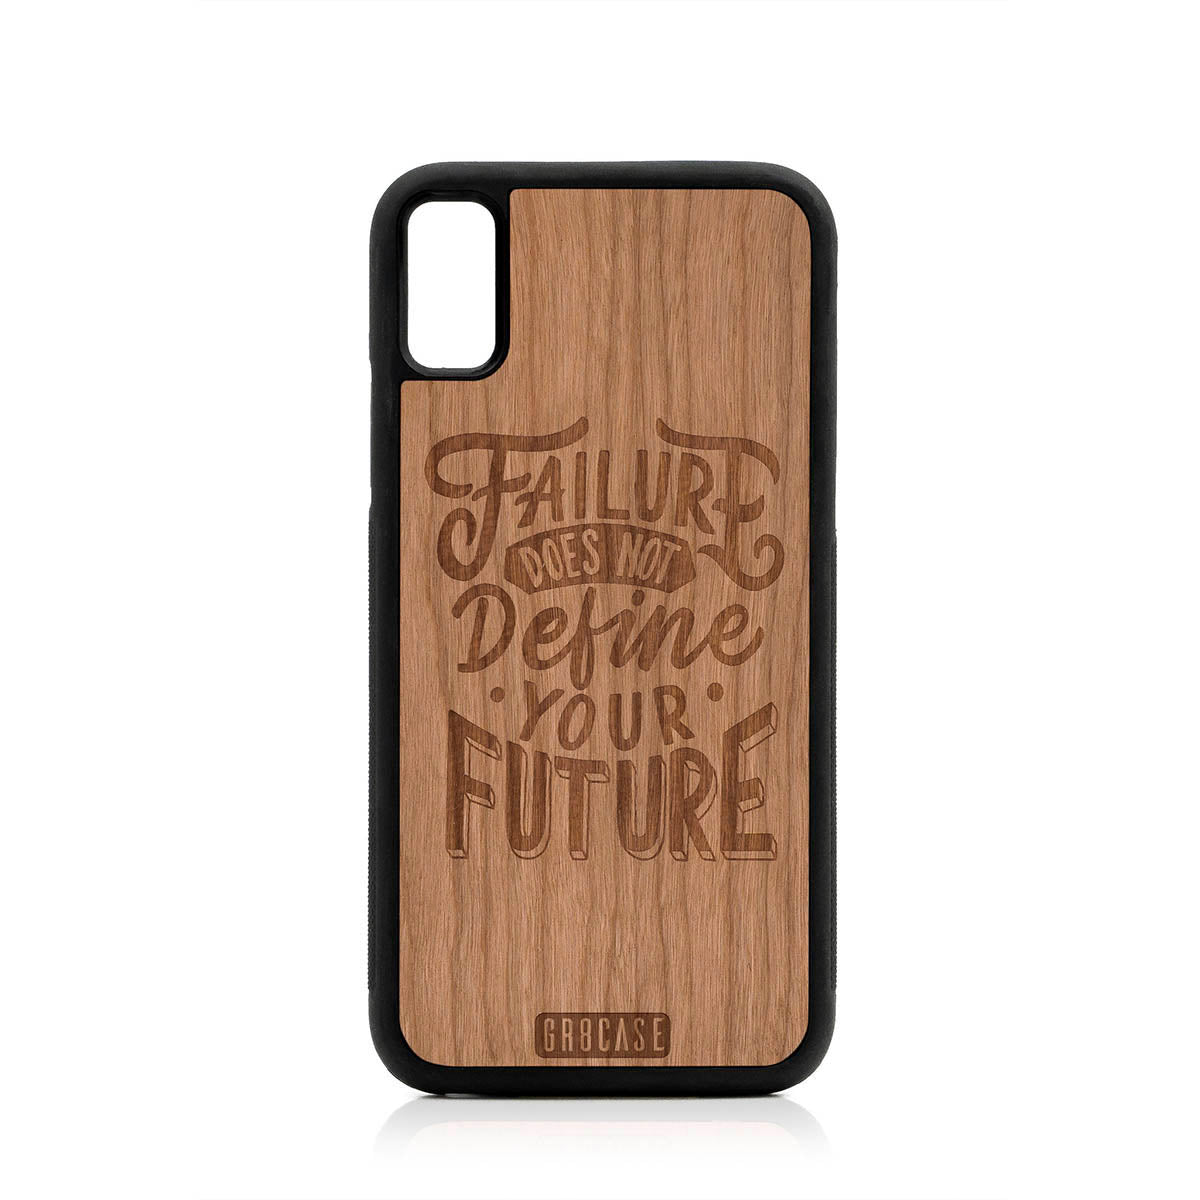 Failure Does Not Define You Future Design Wood Case For iPhone X/XS by GR8CASE